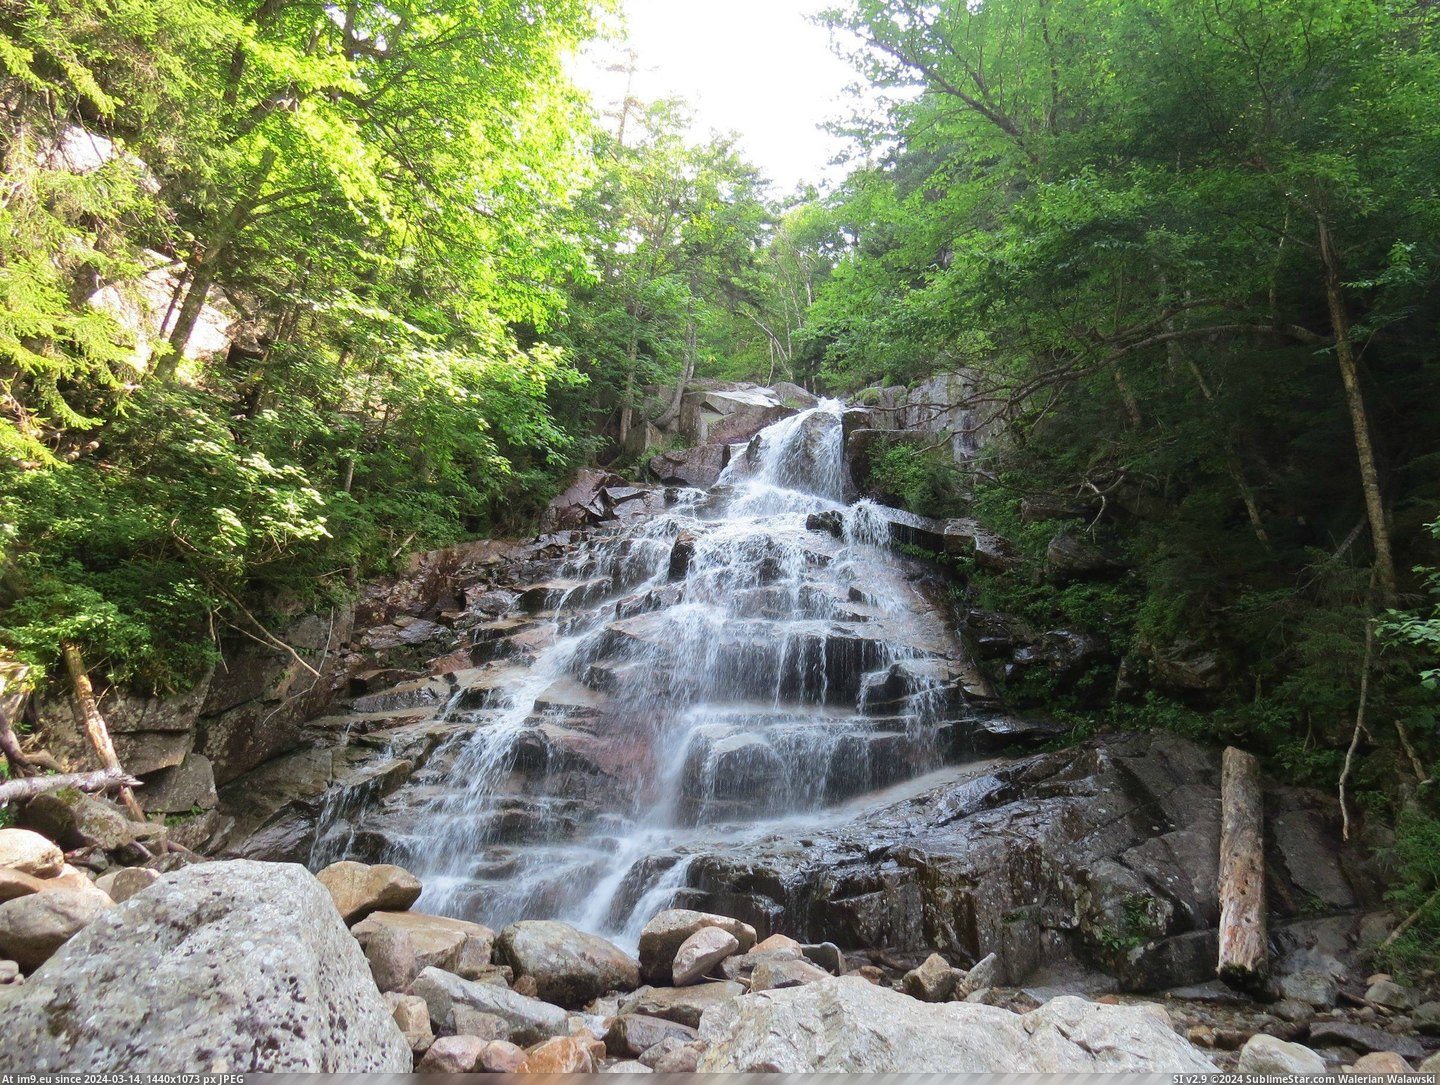 #Waterfall #Hiking #2400x1800 #Lincoln #Hampshire [Earthporn] Waterfall I came across while hiking up Mt. Lincoln, New Hampshire [2400x1800][OC] Pic. (Изображение из альбом My r/EARTHPORN favs))